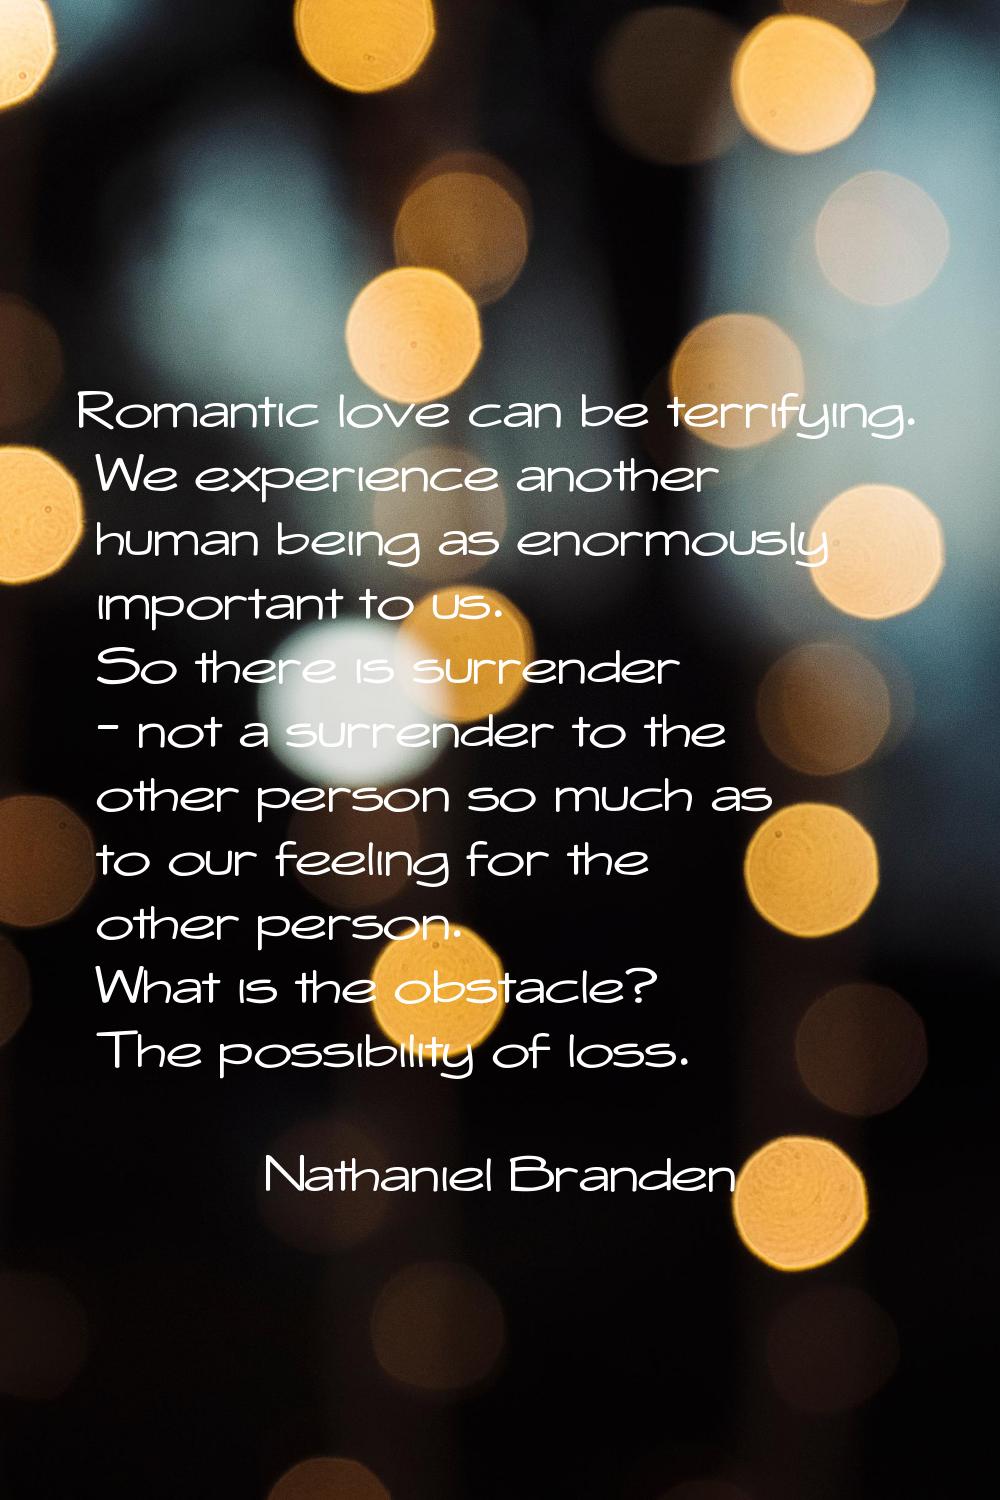 Romantic love can be terrifying. We experience another human being as enormously important to us. S